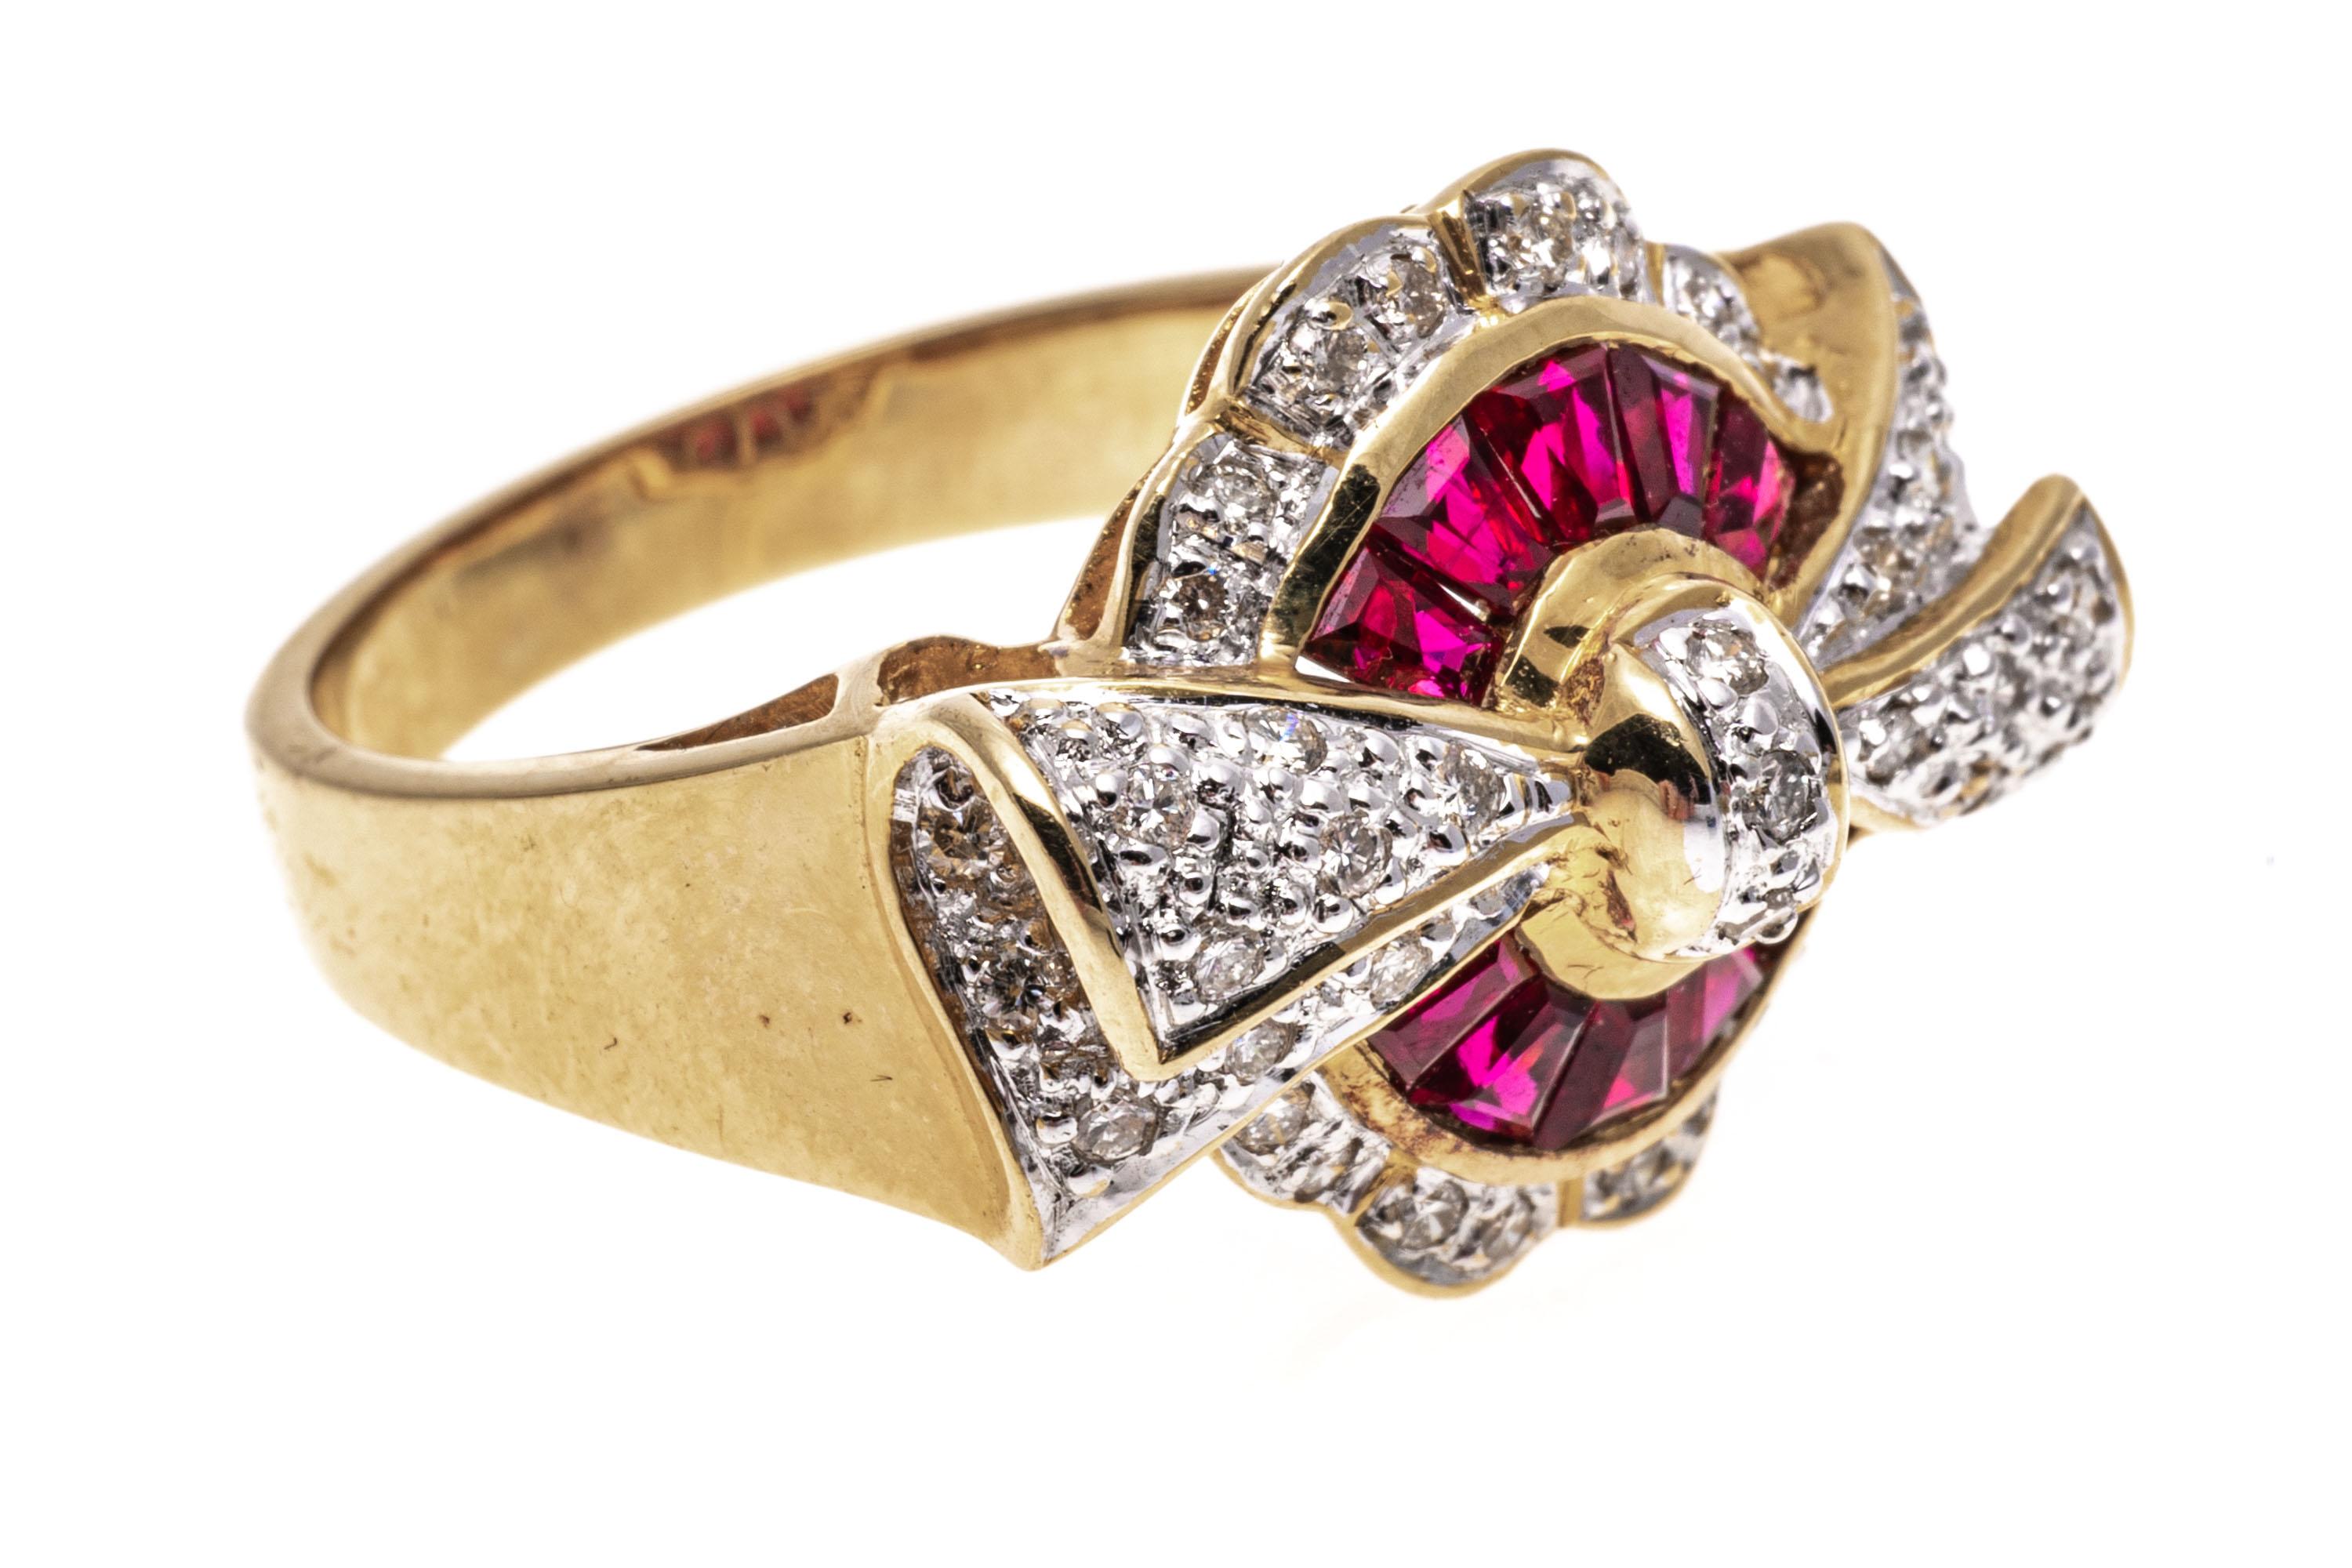 18k yellow gold ring. This striking yellow gold ring is a round shield motif, set with a center of tapered baguette cut rubies, channel set and framed with a scalloped border of round faceted diamonds, Set across the top is a bow motif, pave set